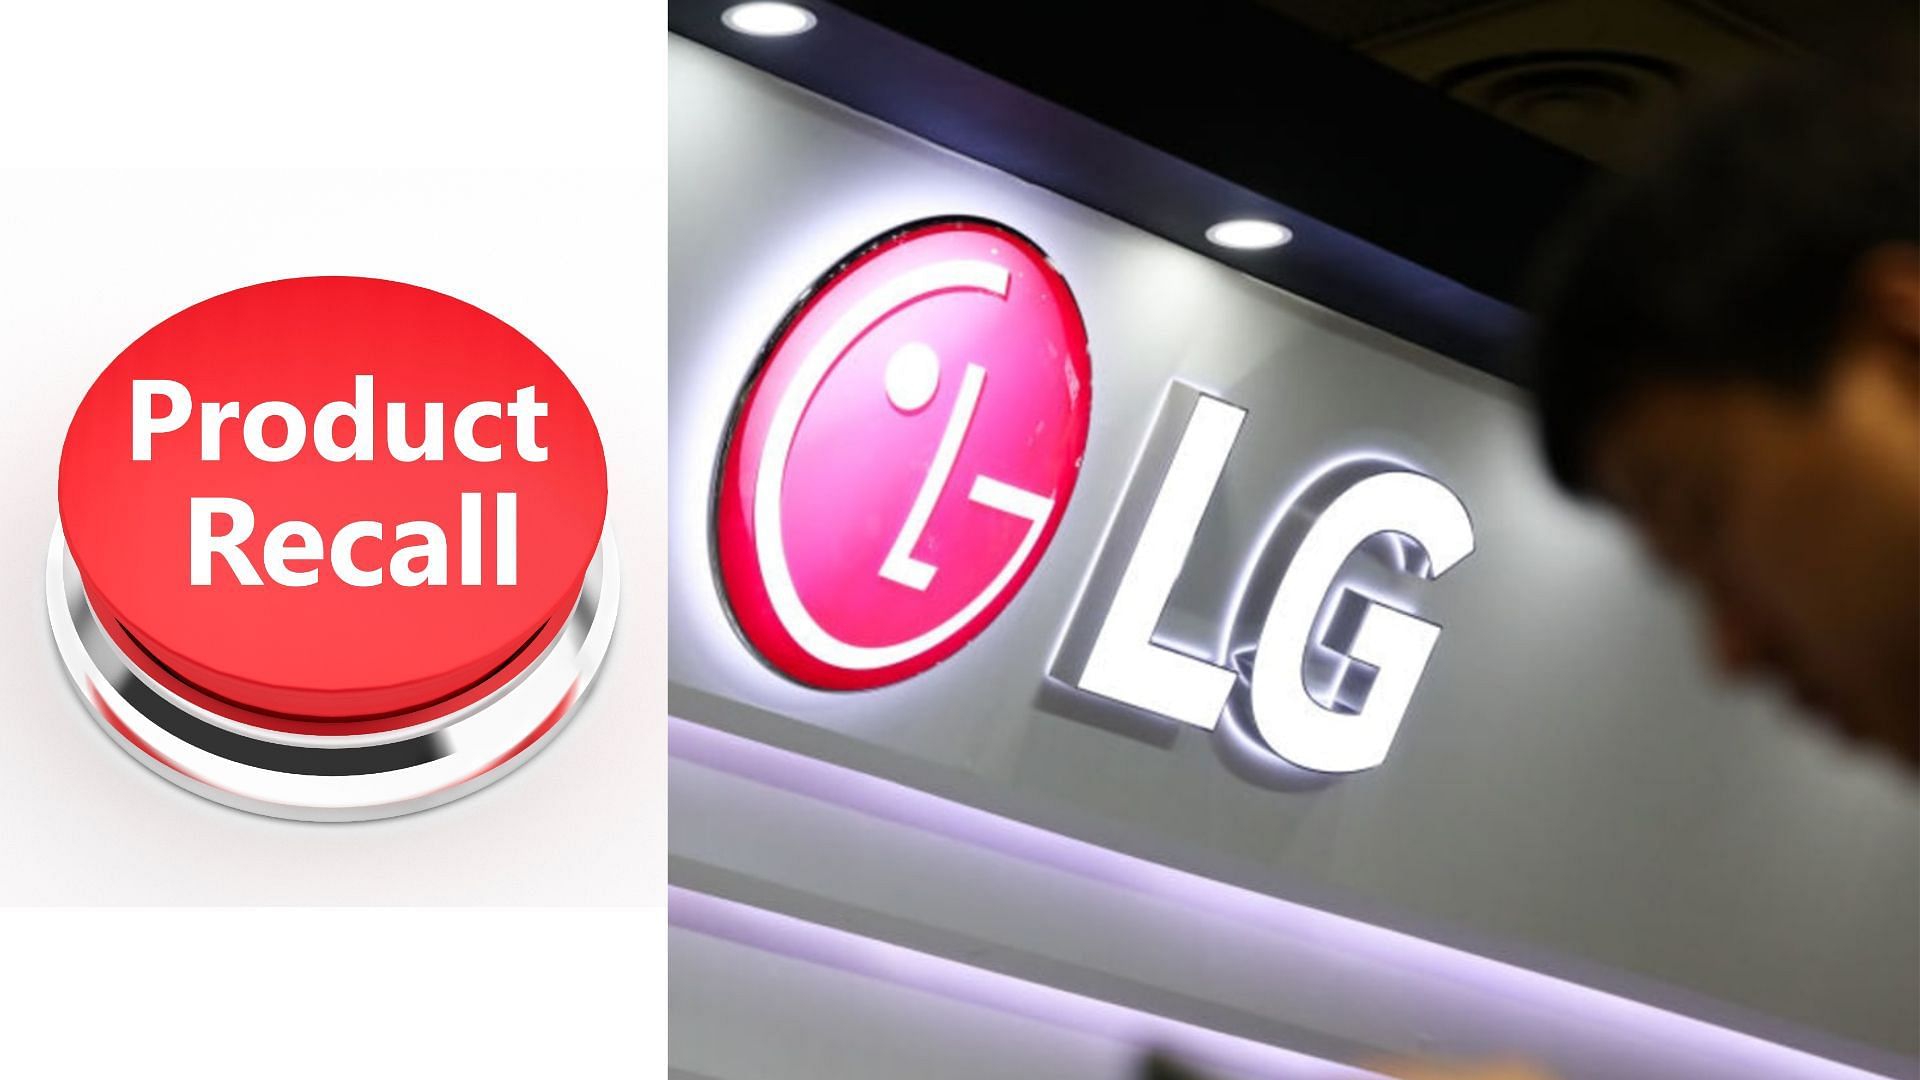 LG Electronics recalls over 52,000 86-inch smart televisions and stands over concerns of tip-overs and entrapments (Image via SeongJoon Cho/Bloomberg/Getty Images)